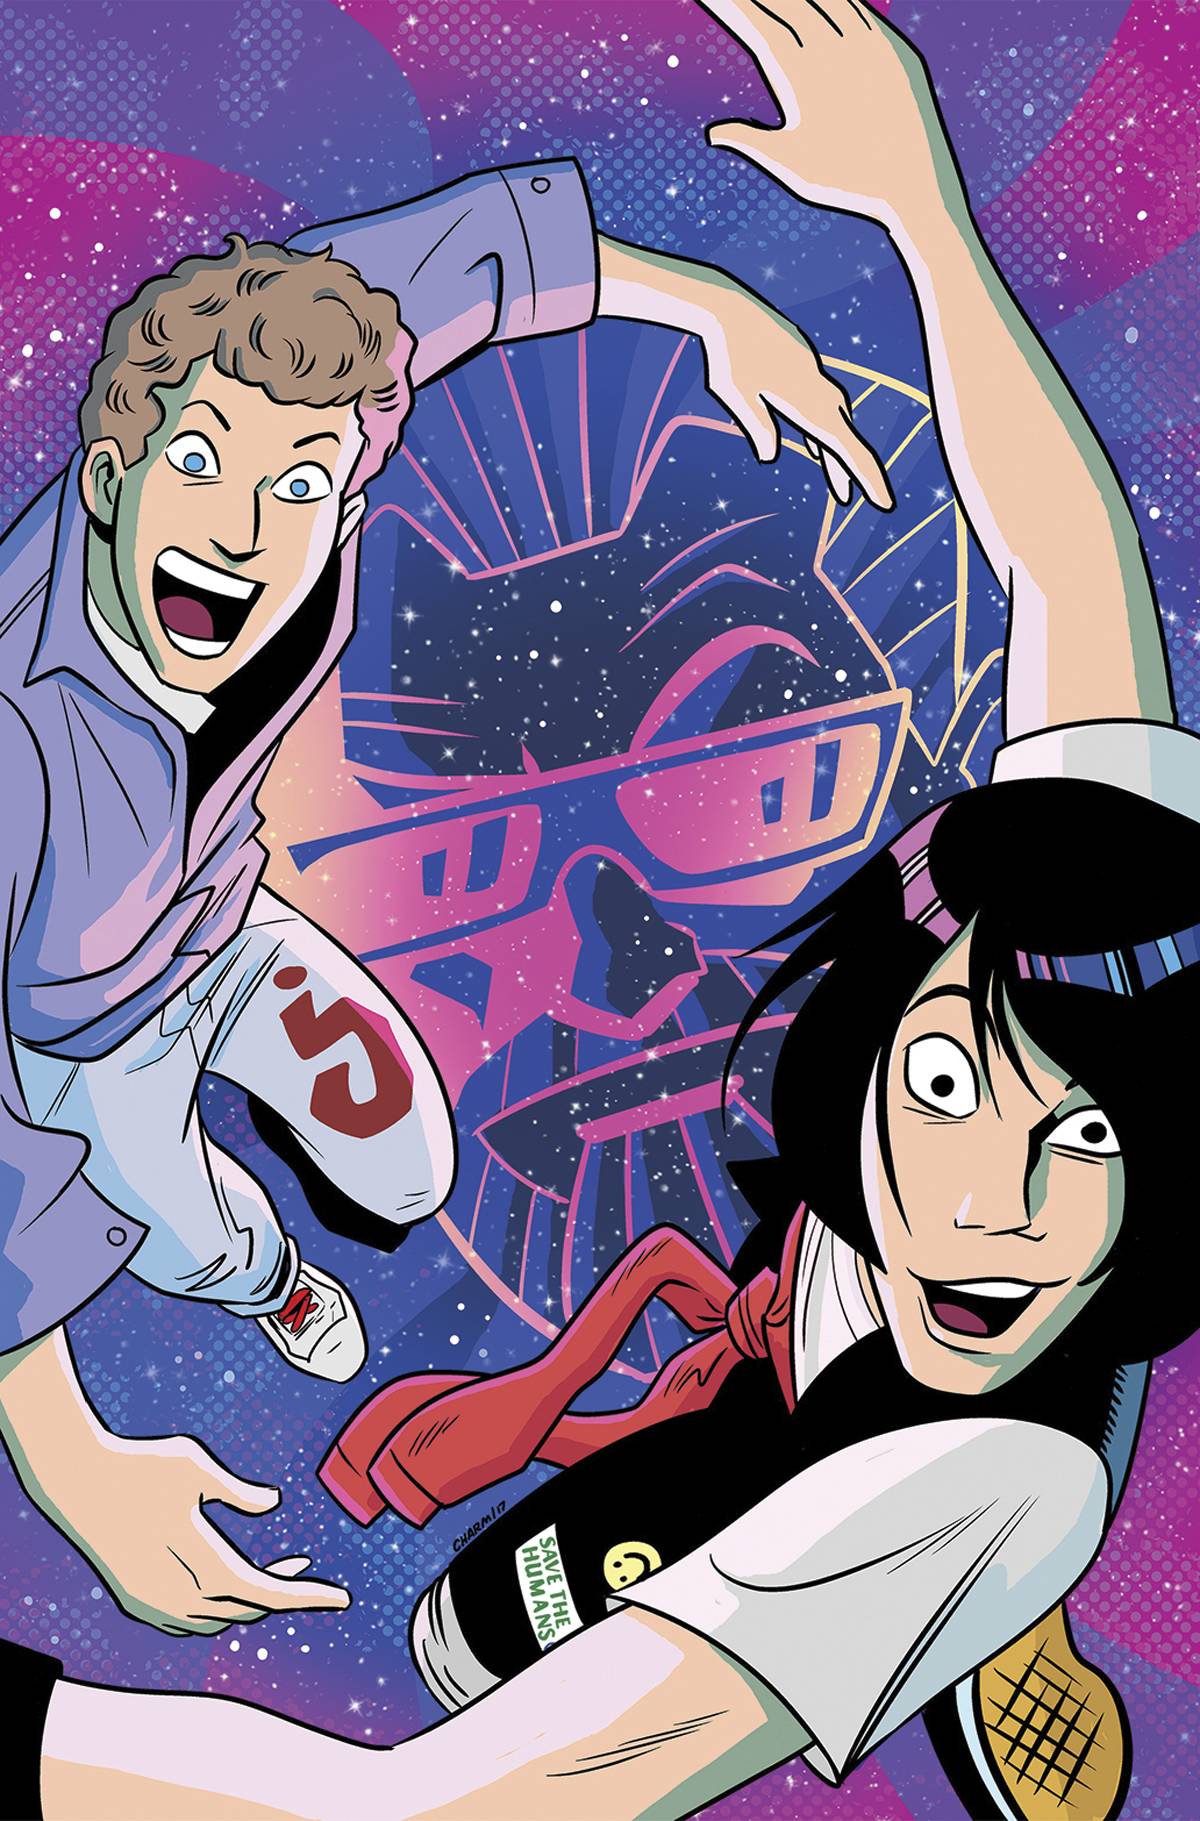 BILL AND TED SAVE THE UNIVERSE#3